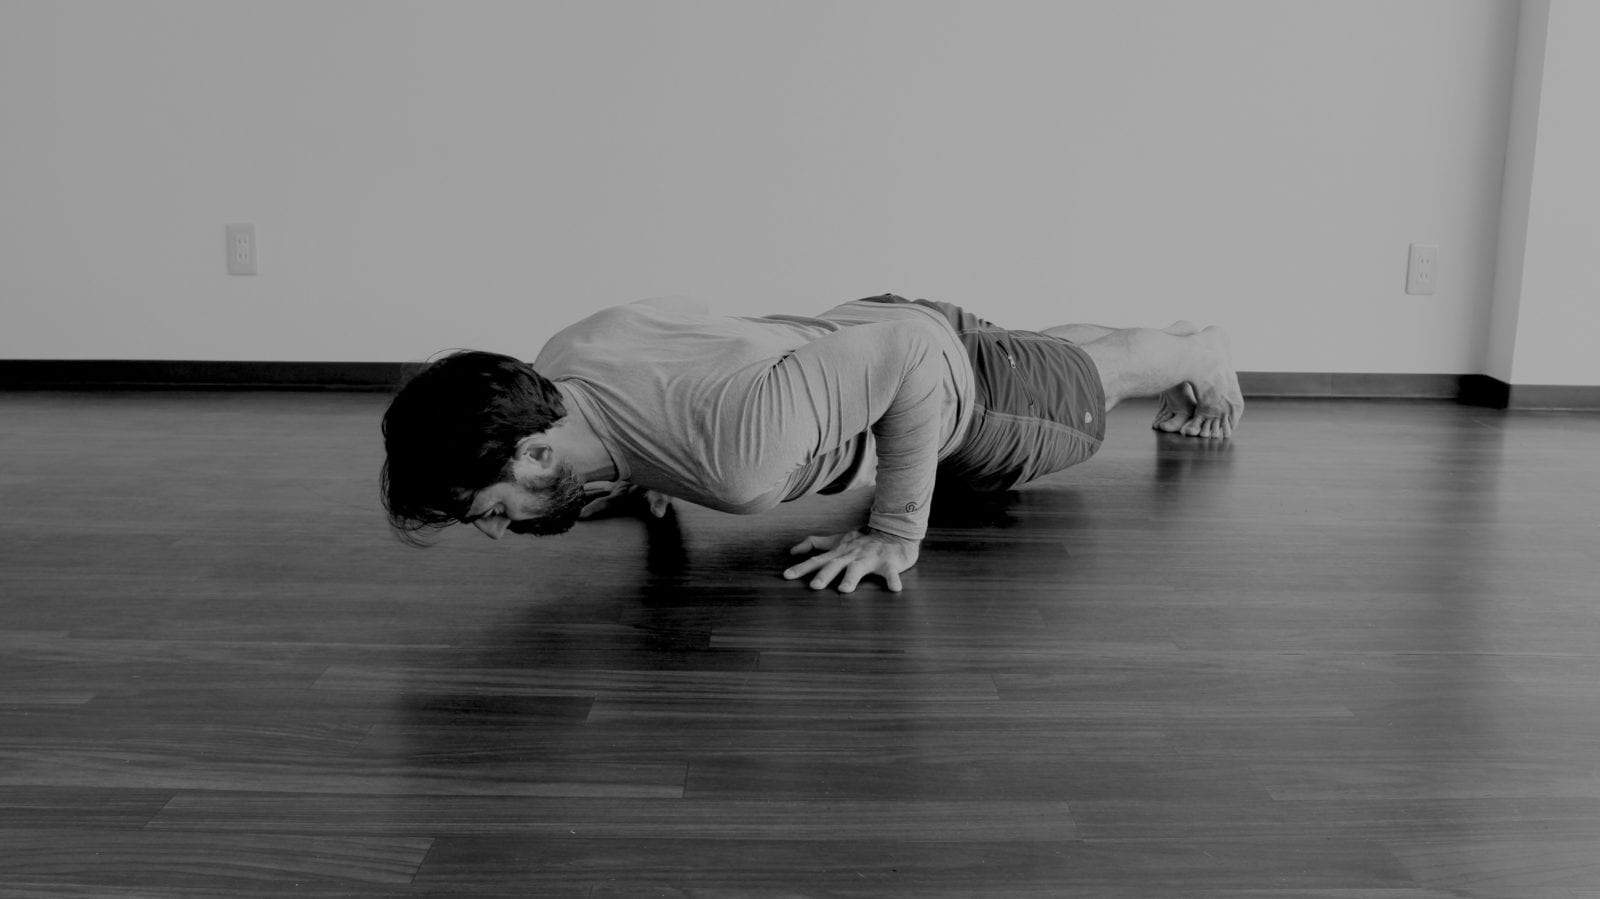 A List of Ways You Can Modify Push-Ups